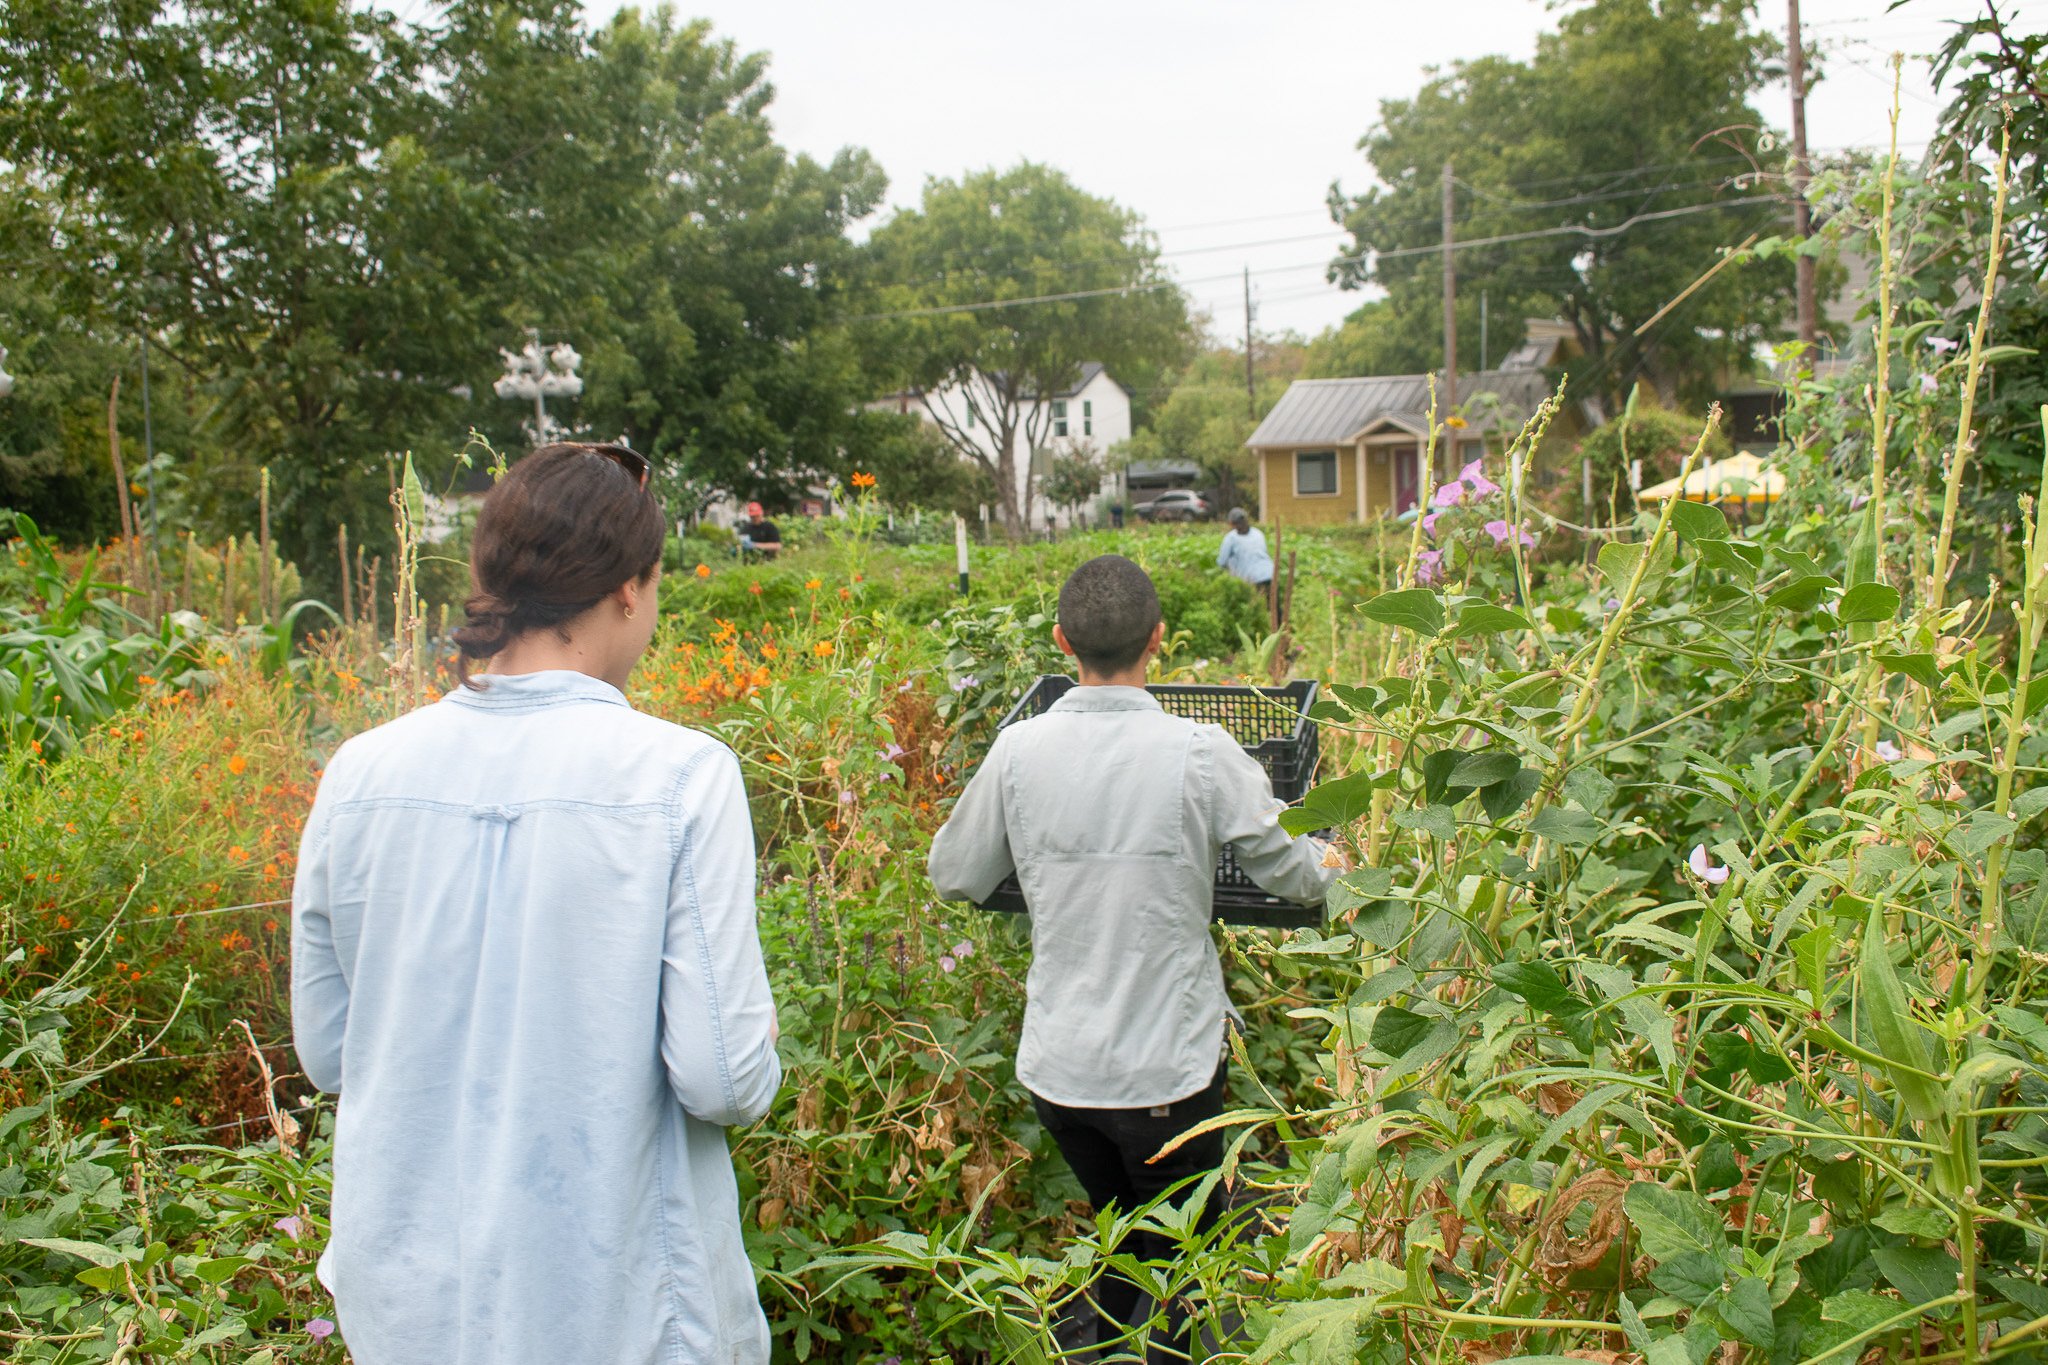   Gutierrez continues to lead Este Garden to a bright future of plentiful harvests and sustainable practices. To her, the garden is an invitation to connect with ourselves, our neighbors and the food on our plates.&nbsp;  